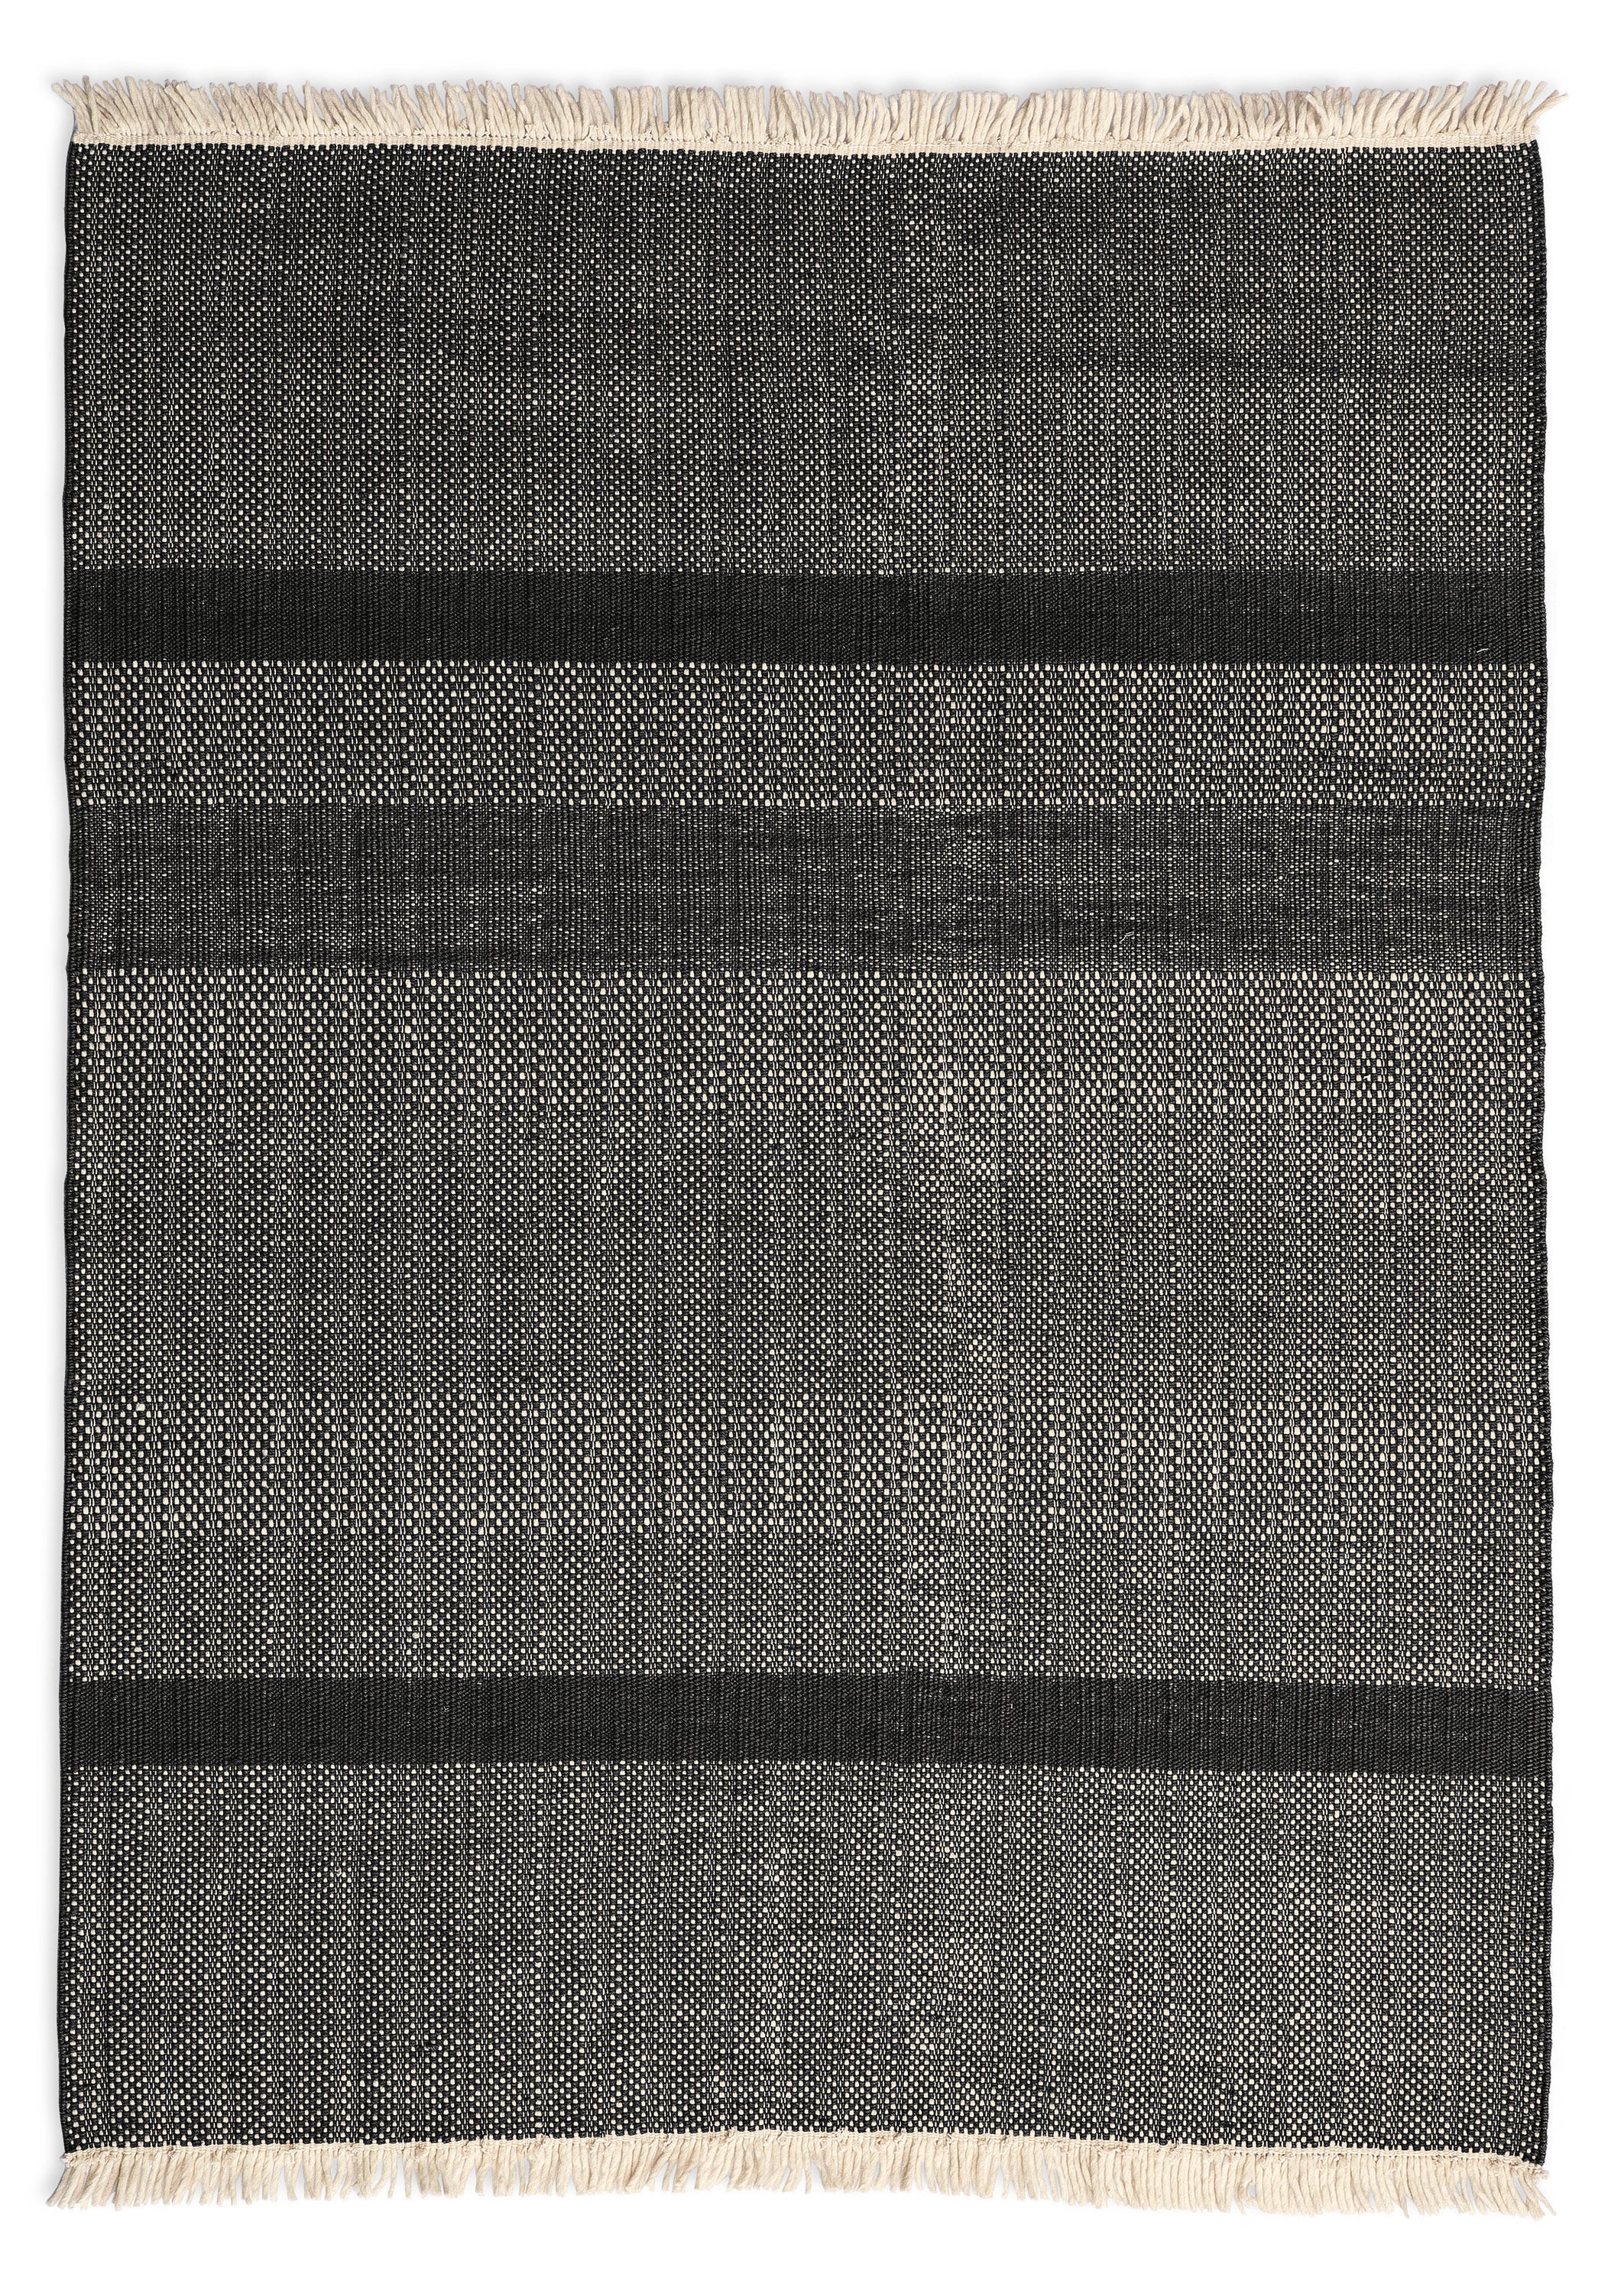 Tres Textured Rug - 6'7''x9'10in / Black